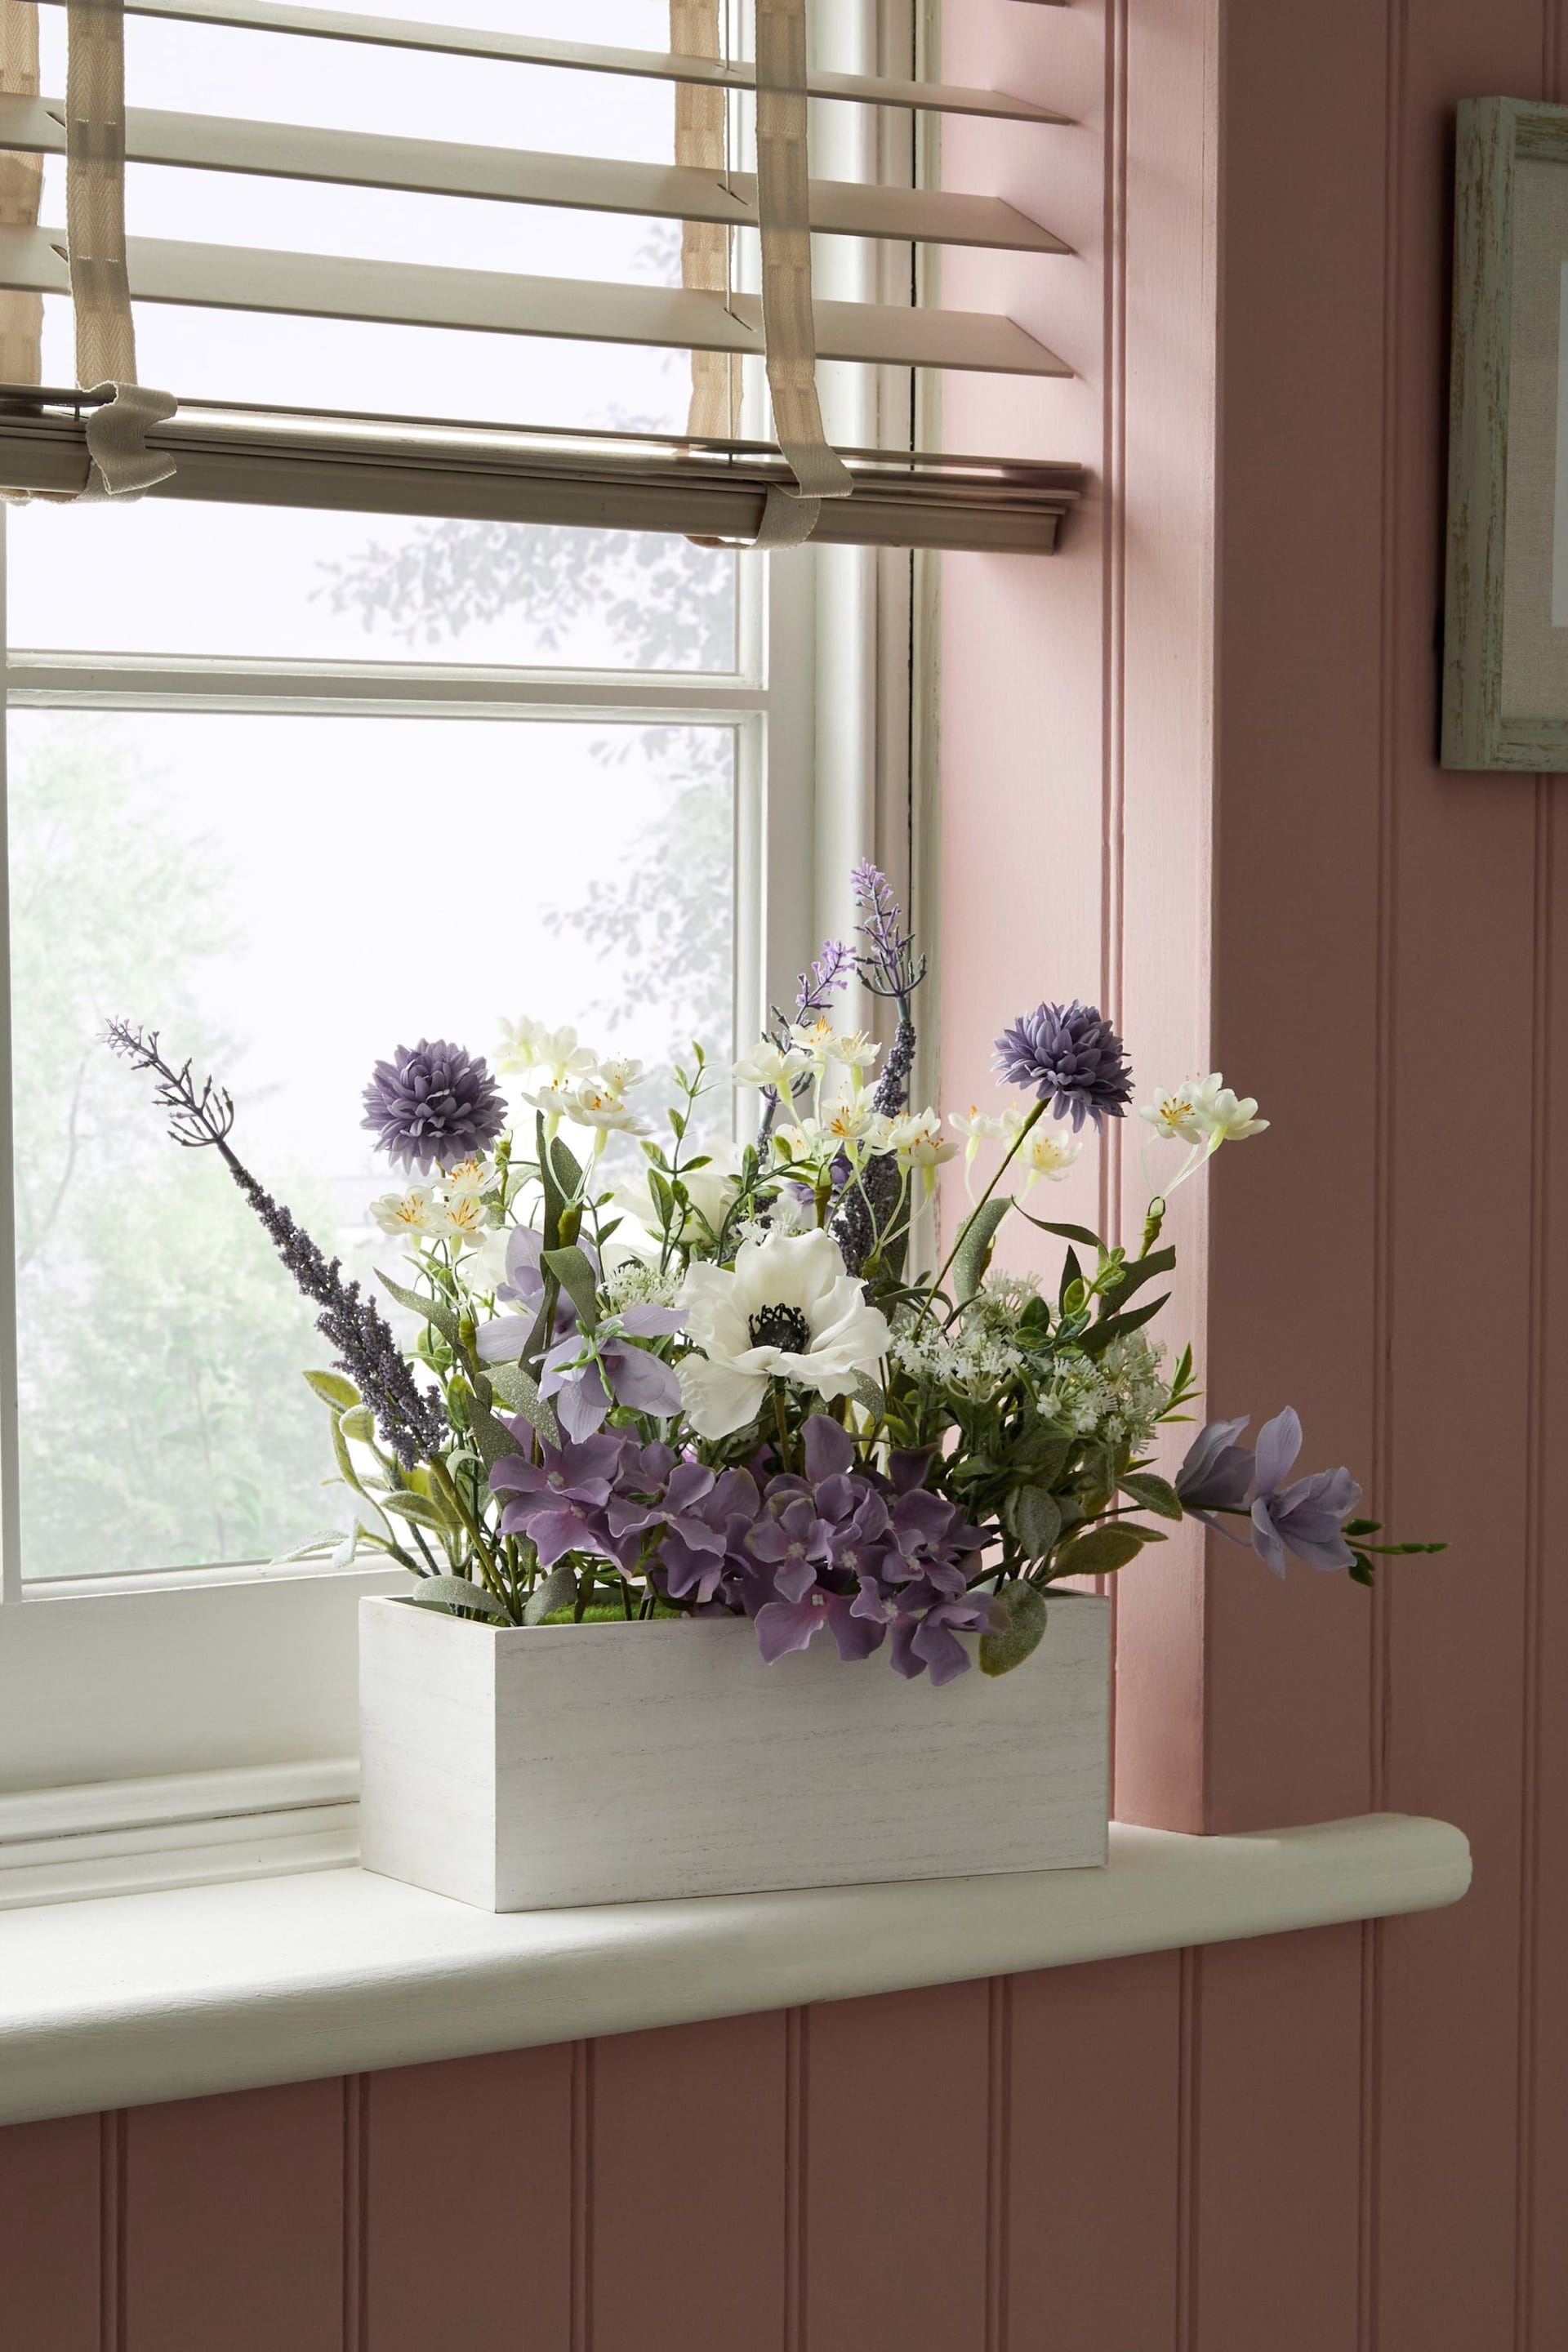 Lilac Purple Artificial Flowers In a Window Box - Image 1 of 4